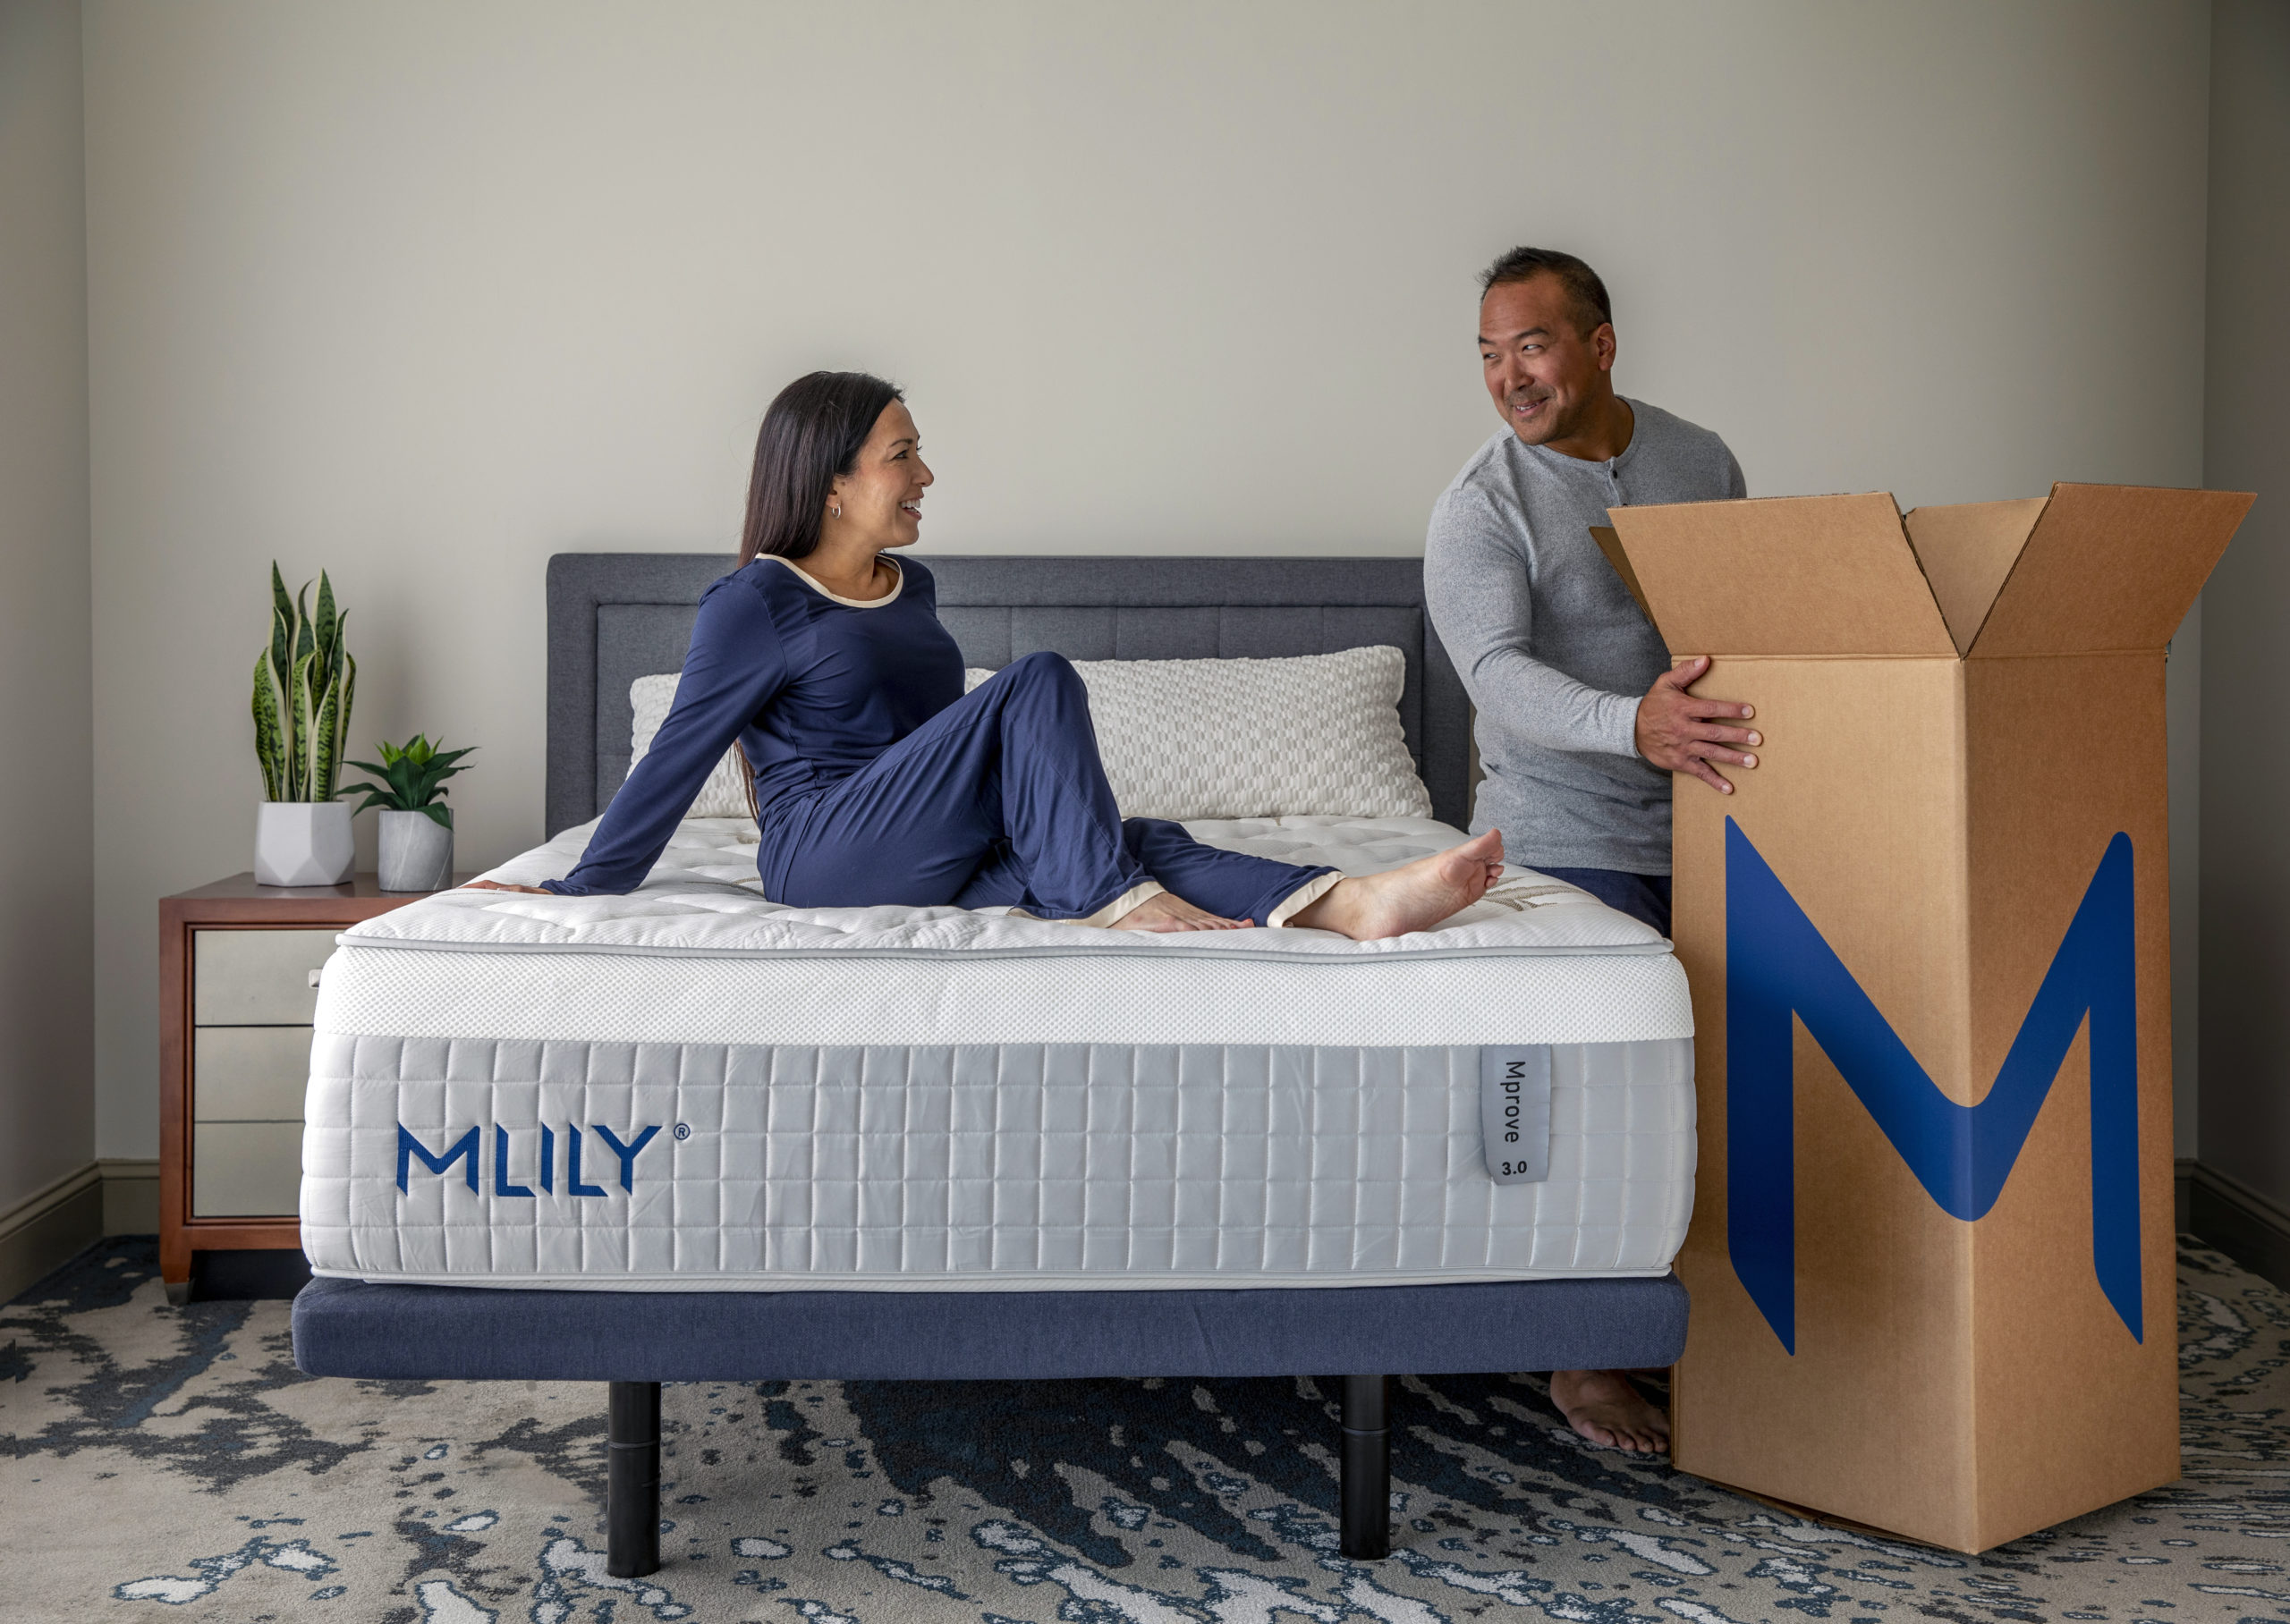 Woman in navy pajamas with dark hair reclining on MLILY-labeled mattress while looking at man in grey shirt as he holds onto large box.